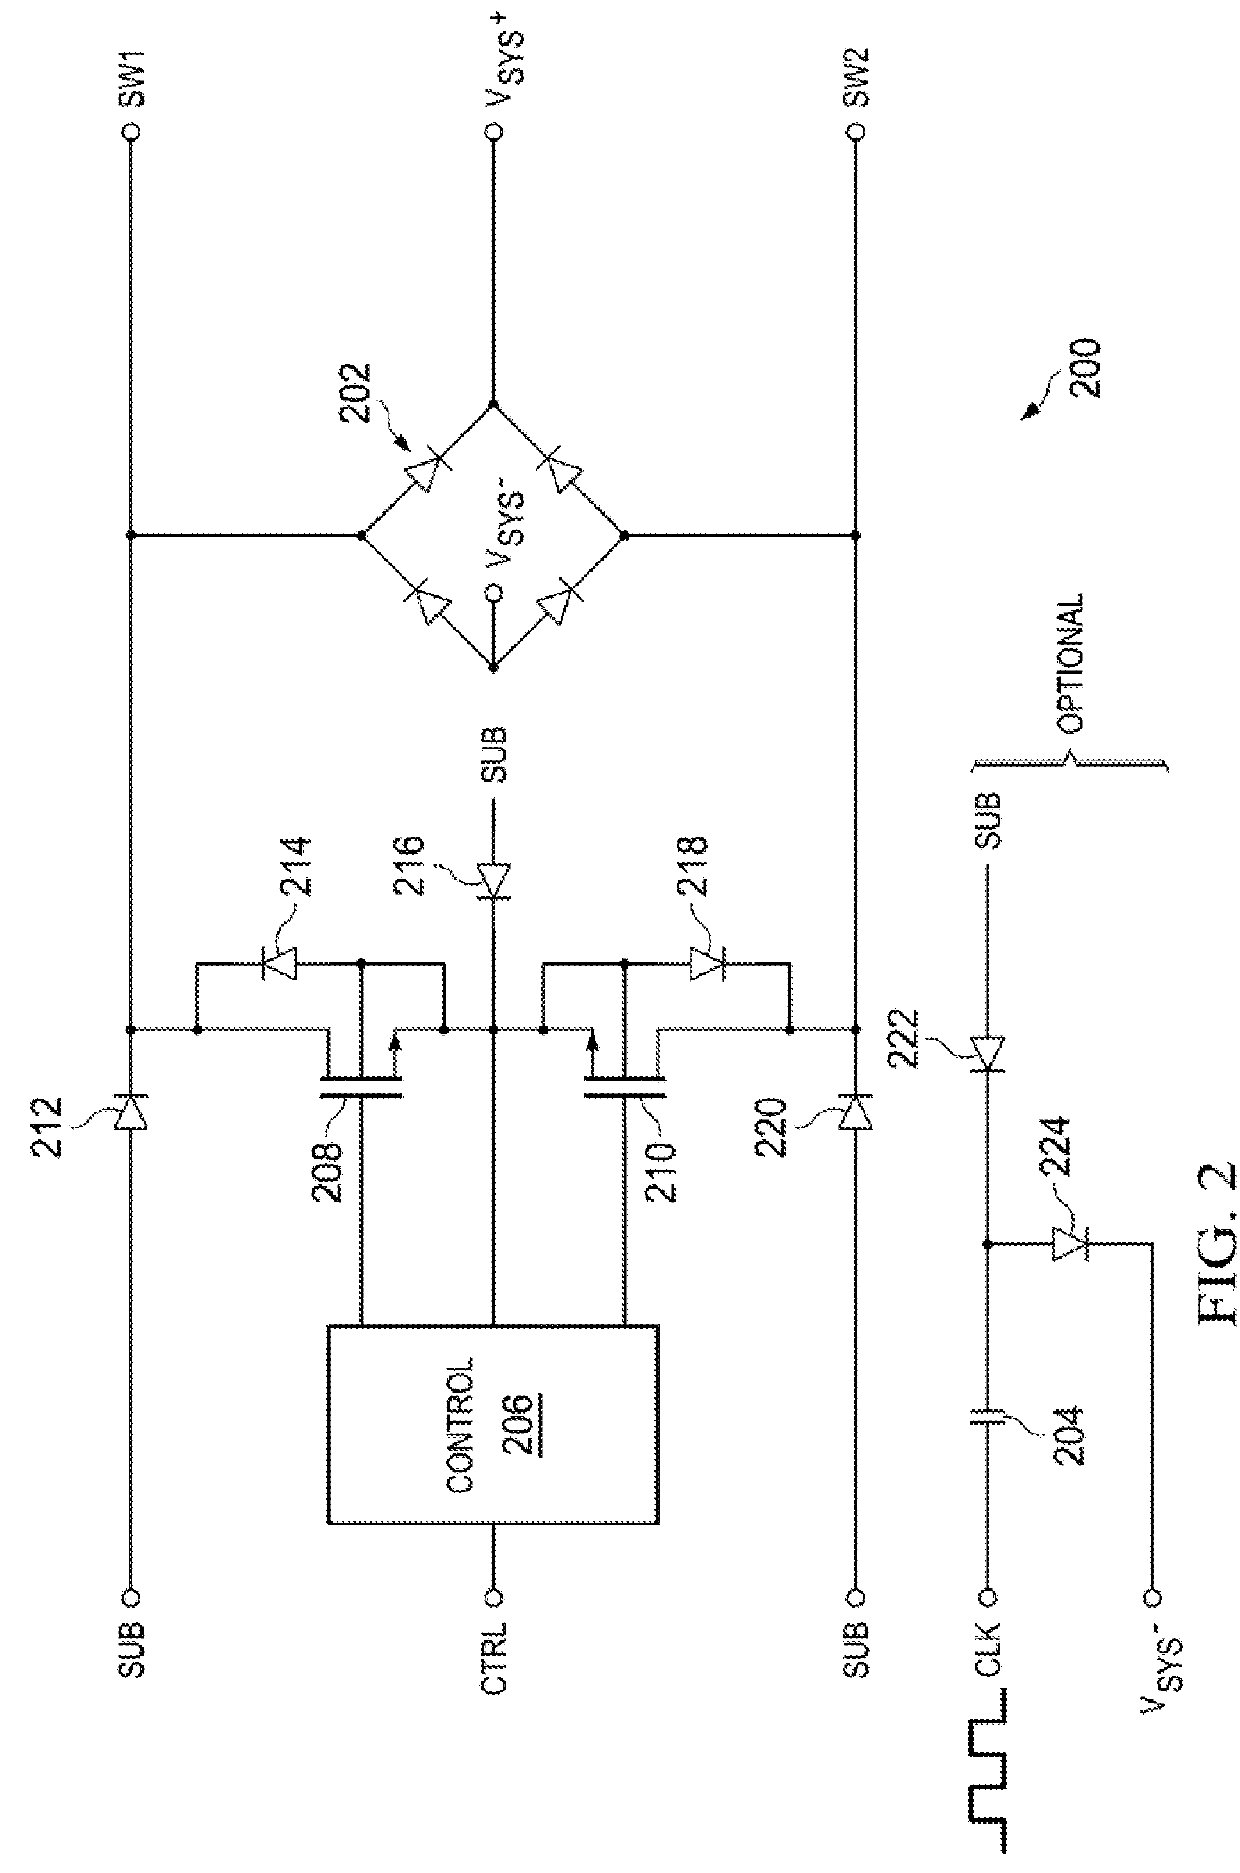 Power sharing solid-state relay